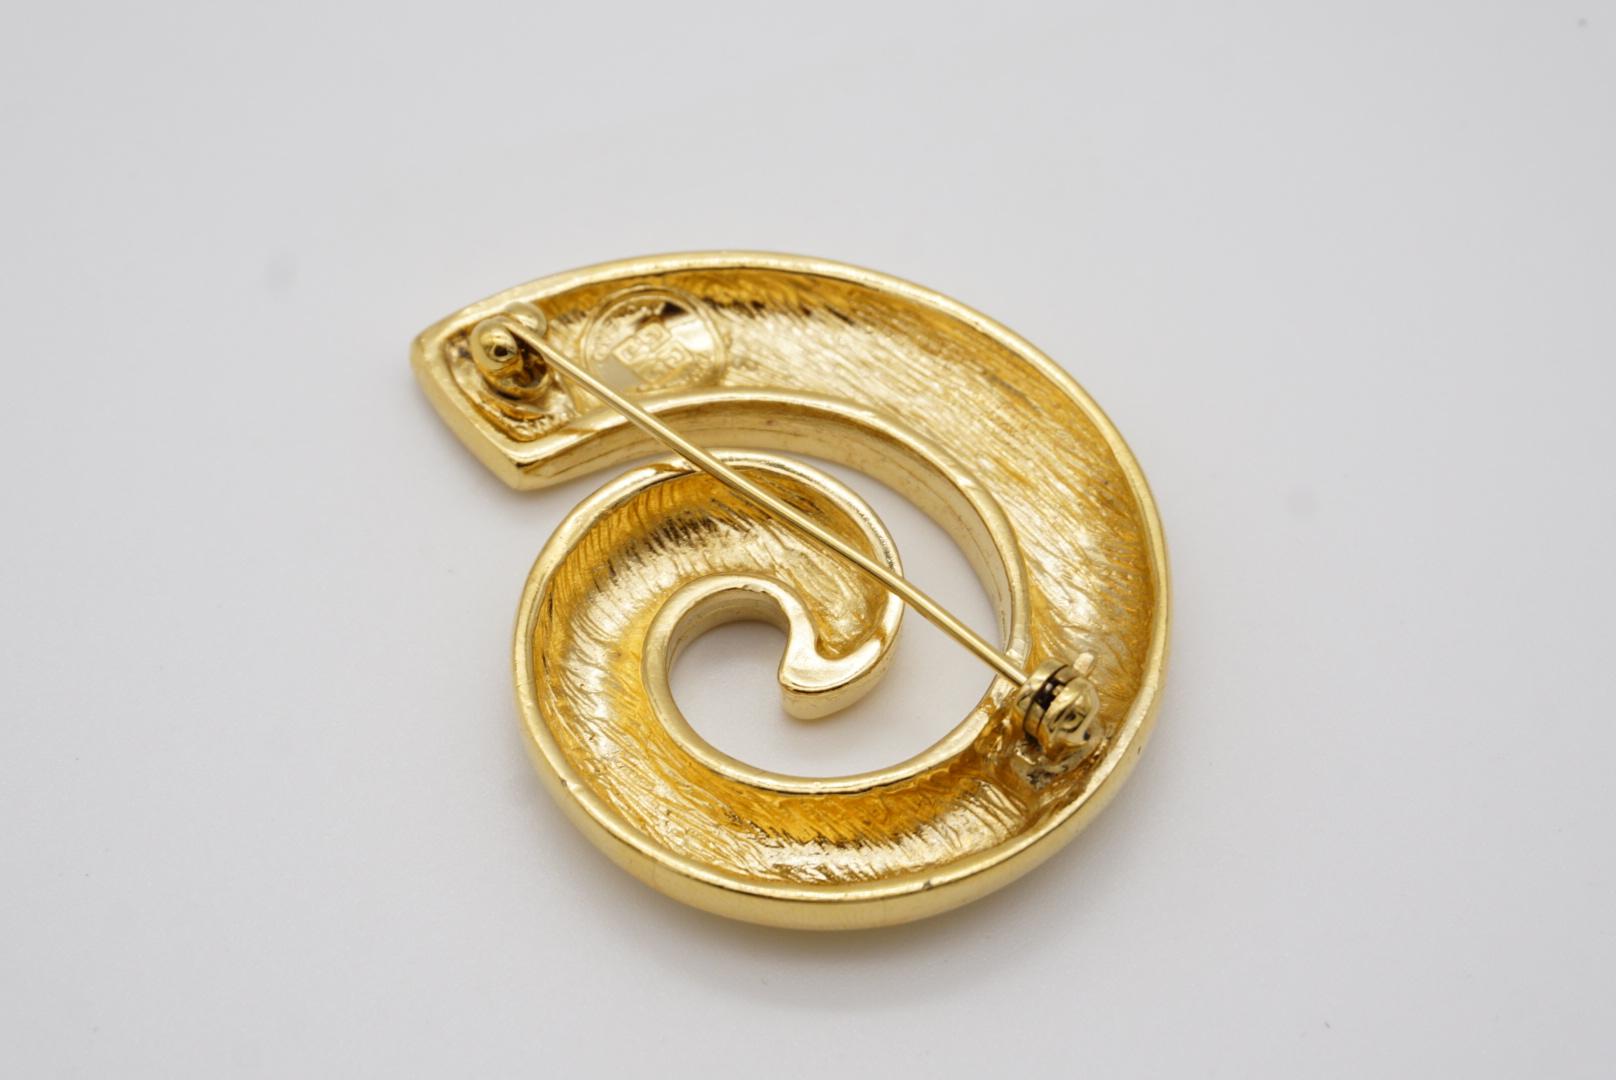 Givenchy Vintage 1980s Large Glow Swirl Sculpted Abstract Modernist Gold Brooch For Sale 3